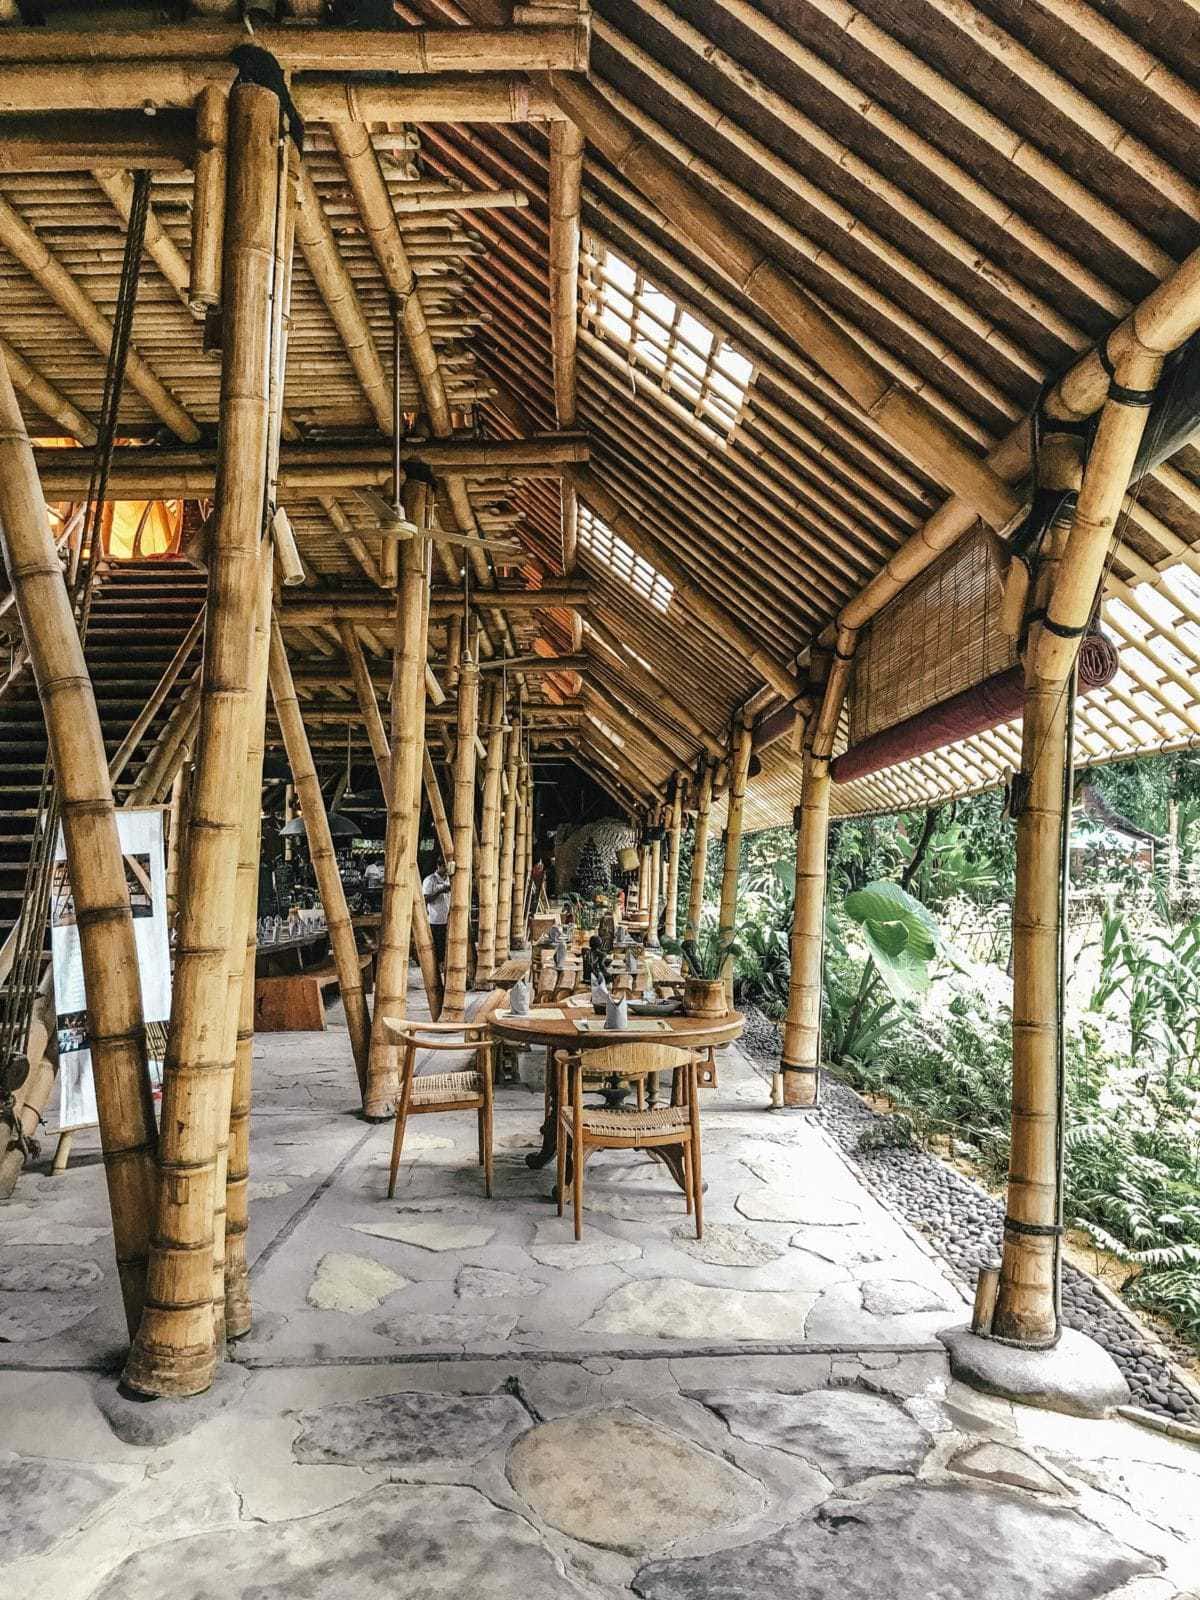 Staying in One of the Most Beautiful Treehouse Hotels in the World - Bambu Indah, Bali